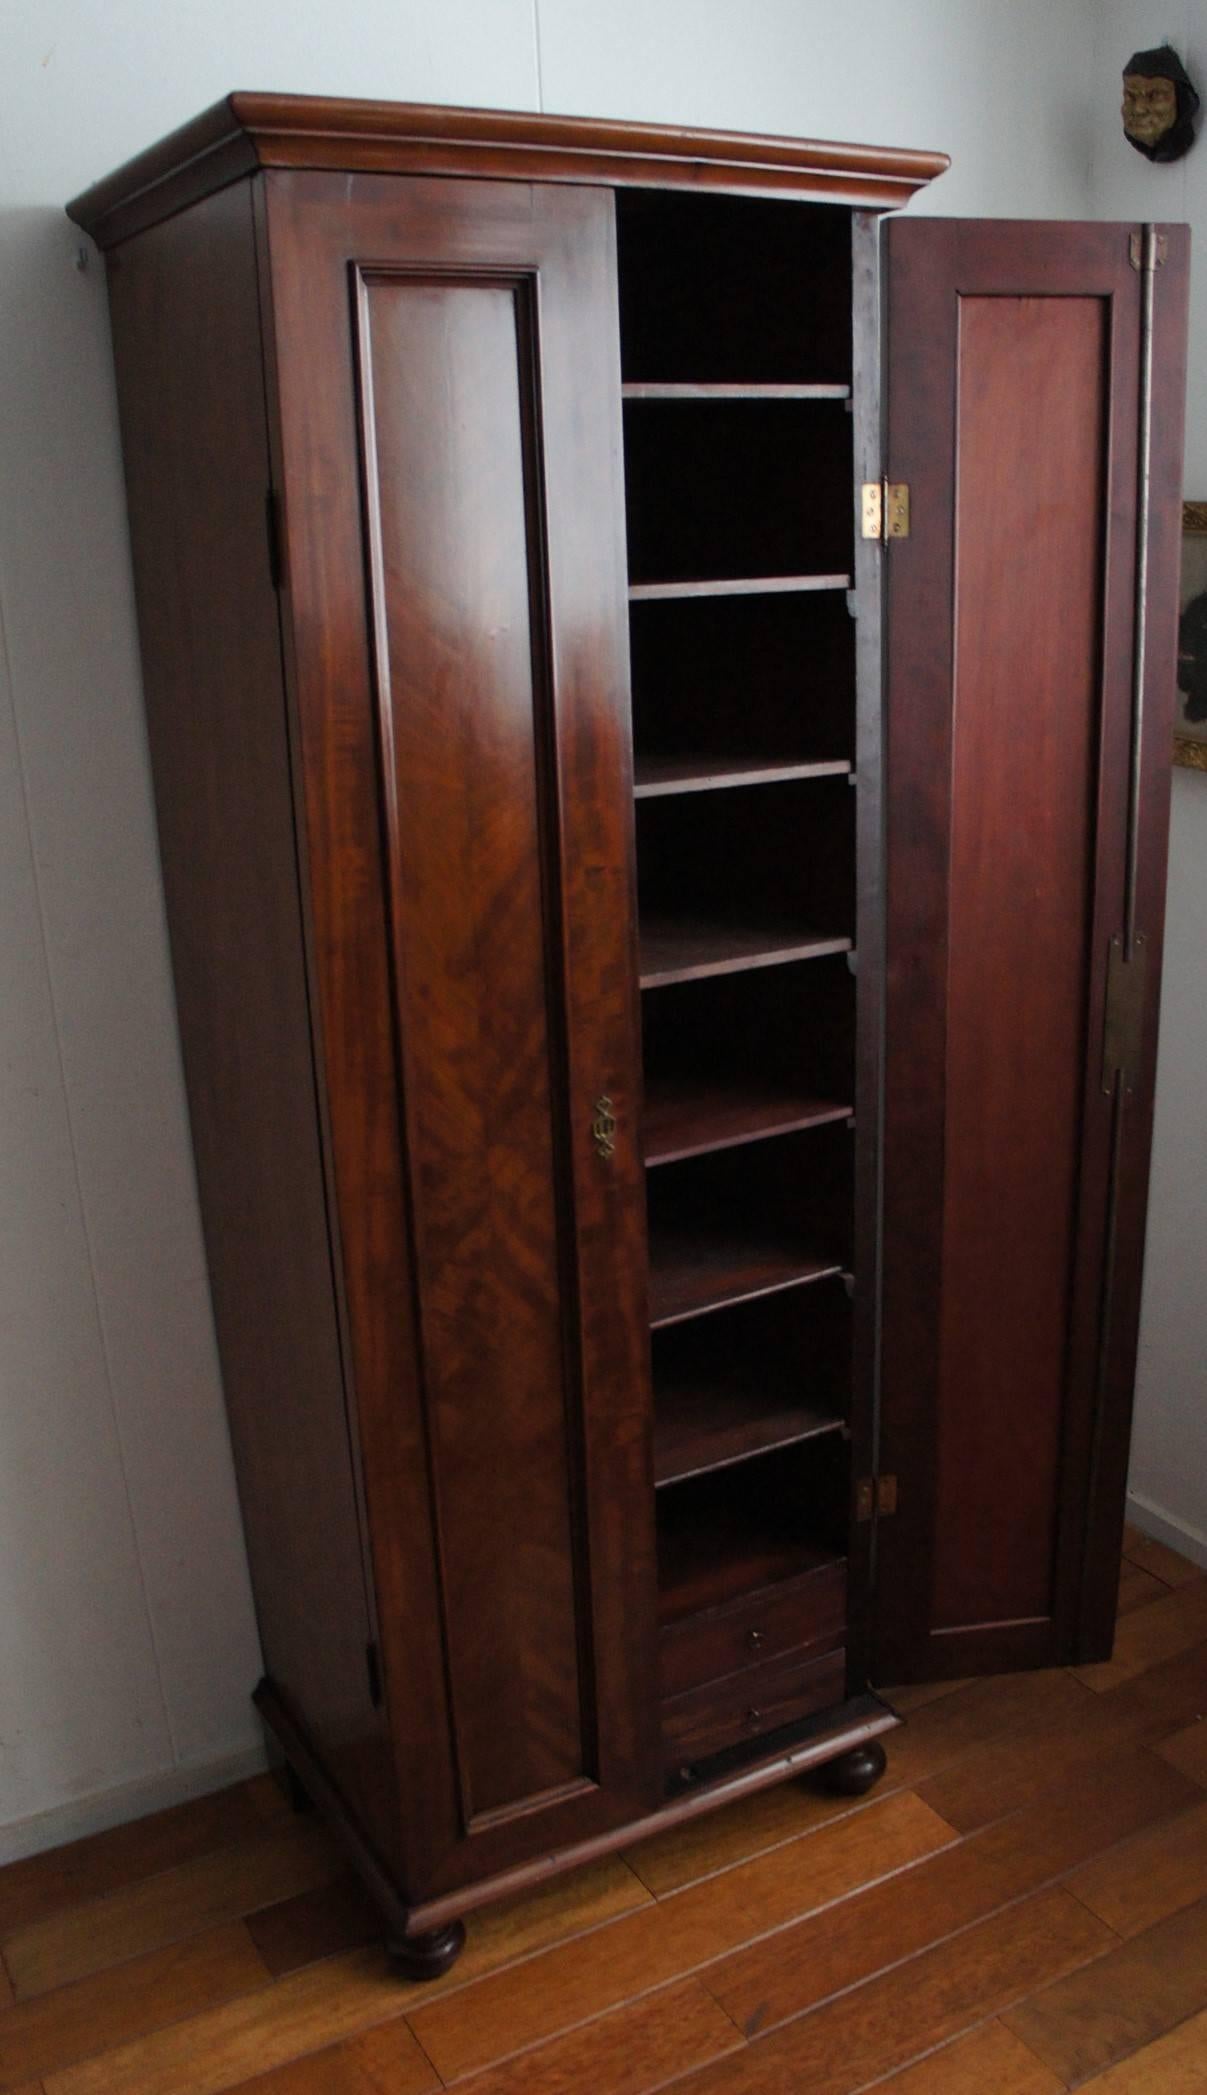 Wonderful and practical filing cabinet.

If you have a lot of paperwork or a collection of old drawings or comic books then this large and stunning mahogany and nutwood filing cabinet could be perfect for your home or office. It is as stabile as